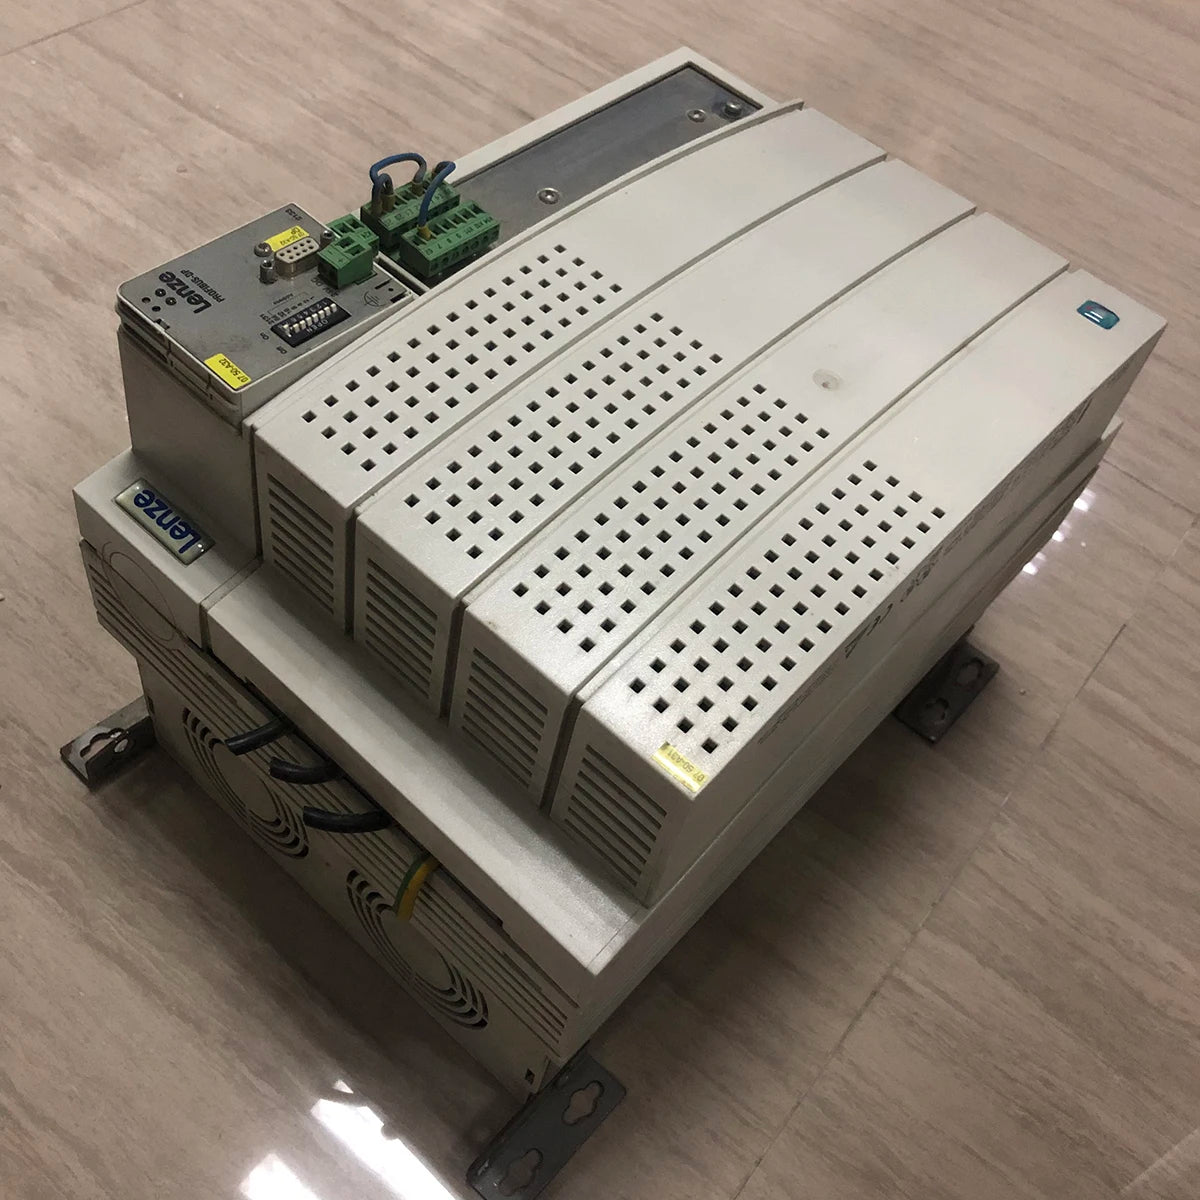 Lenze EVF8221-E 15KW 380V Frequency Converter Used